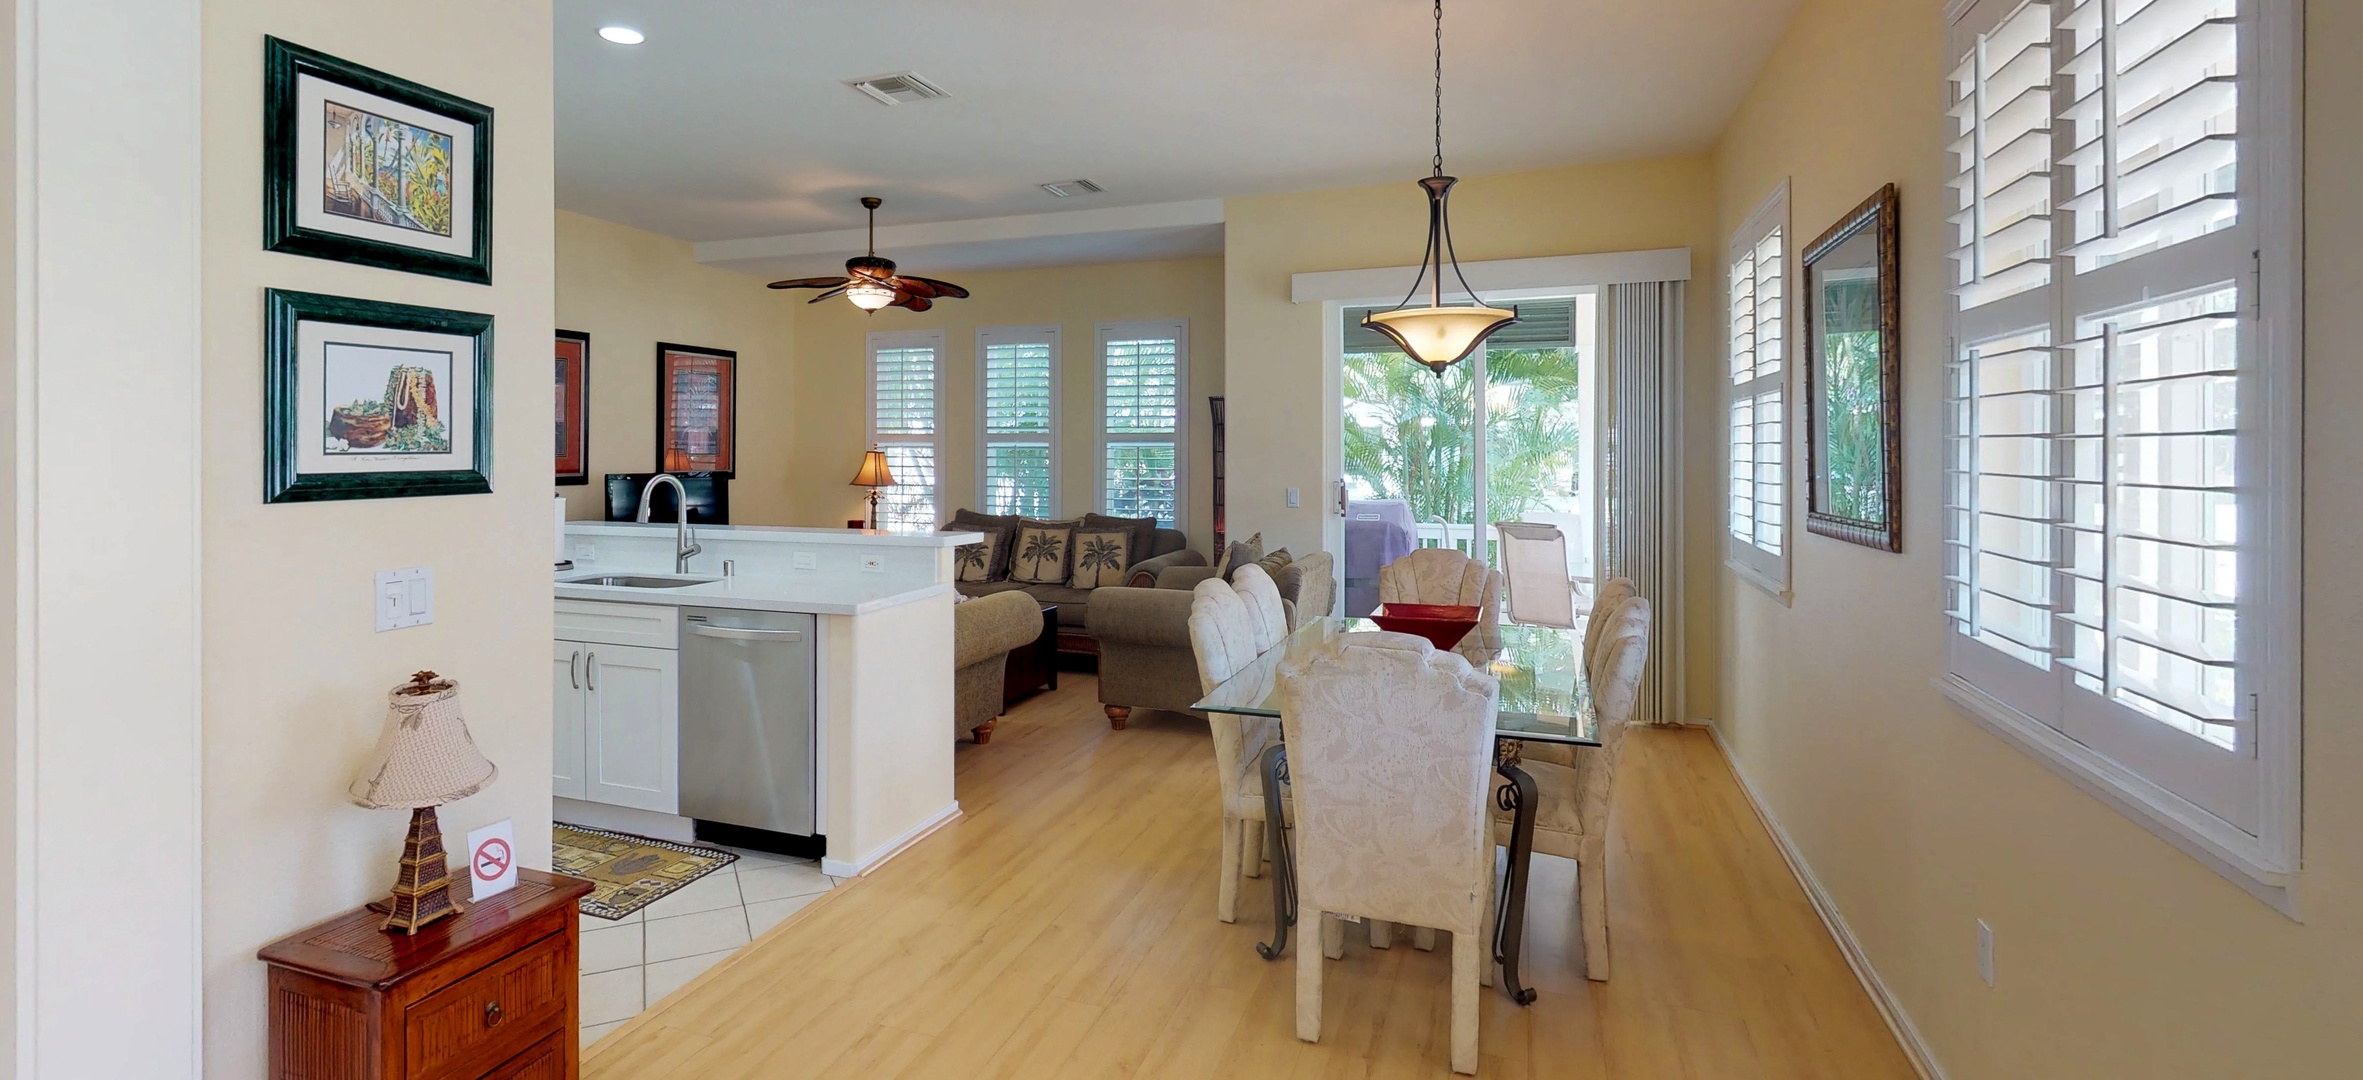 Kapolei Vacation Rentals, Coconut Plantation 1078-3 - Dine with a view and converse with the chef.